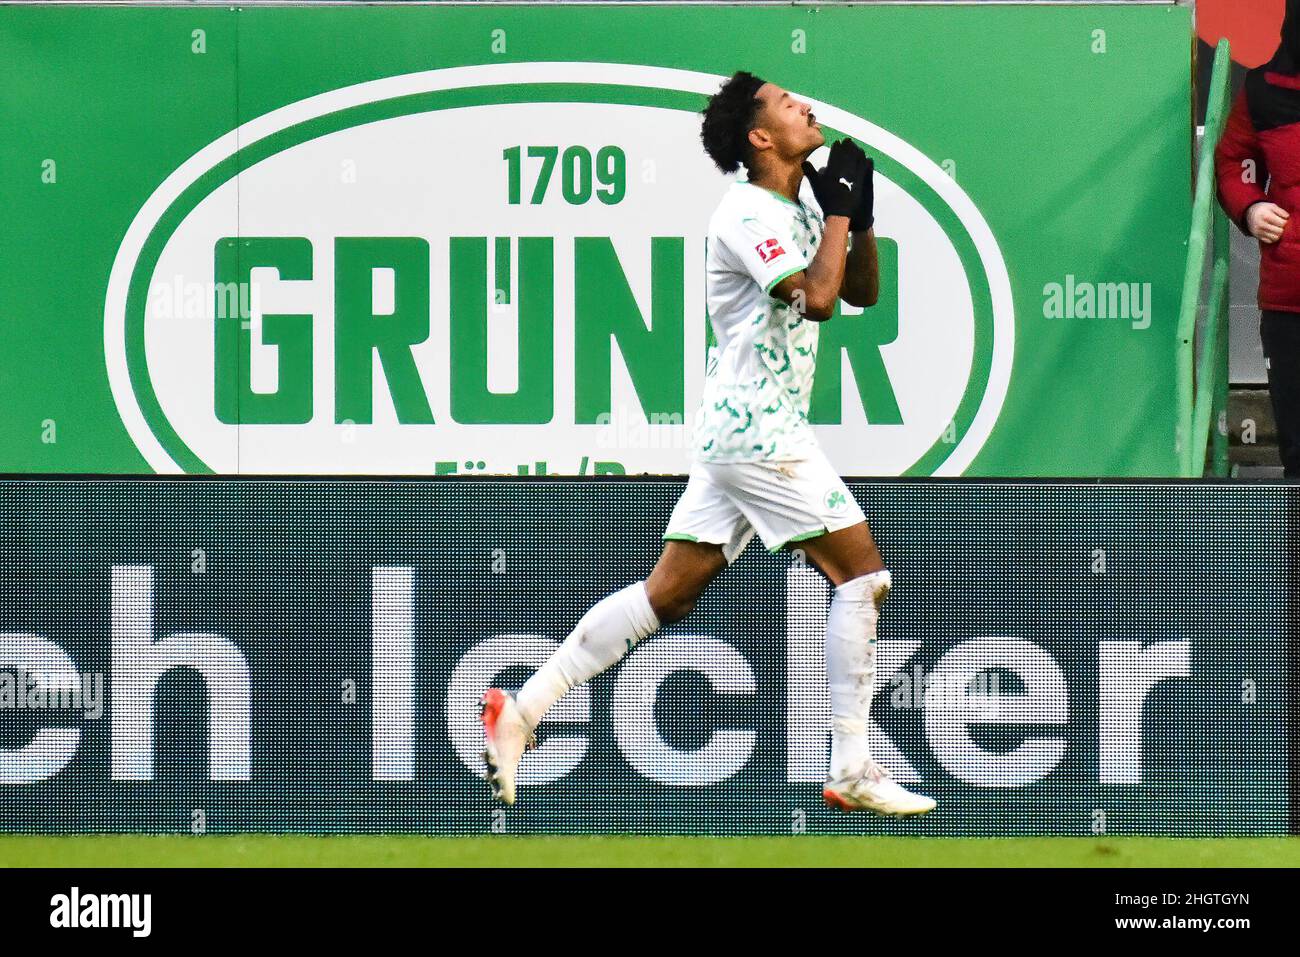 Germany ,Fuerth, Sportpark Ronhof Thomas Sommer - 22 Jan 2022 - Fussball, 1.Bundesliga - SpVgg Greuther Fuerth vs. FSV Mainz 05 Image: Jeremy Dudziak (SpVgg Greuther Fürth,28) celebrating after shooting the 1:0 goal passed GK Robin Zentner (Mainz, 27) in the 12th minute.  DFL regulations prohibit any use of photographs as image sequences and or quasi-video Stock Photo